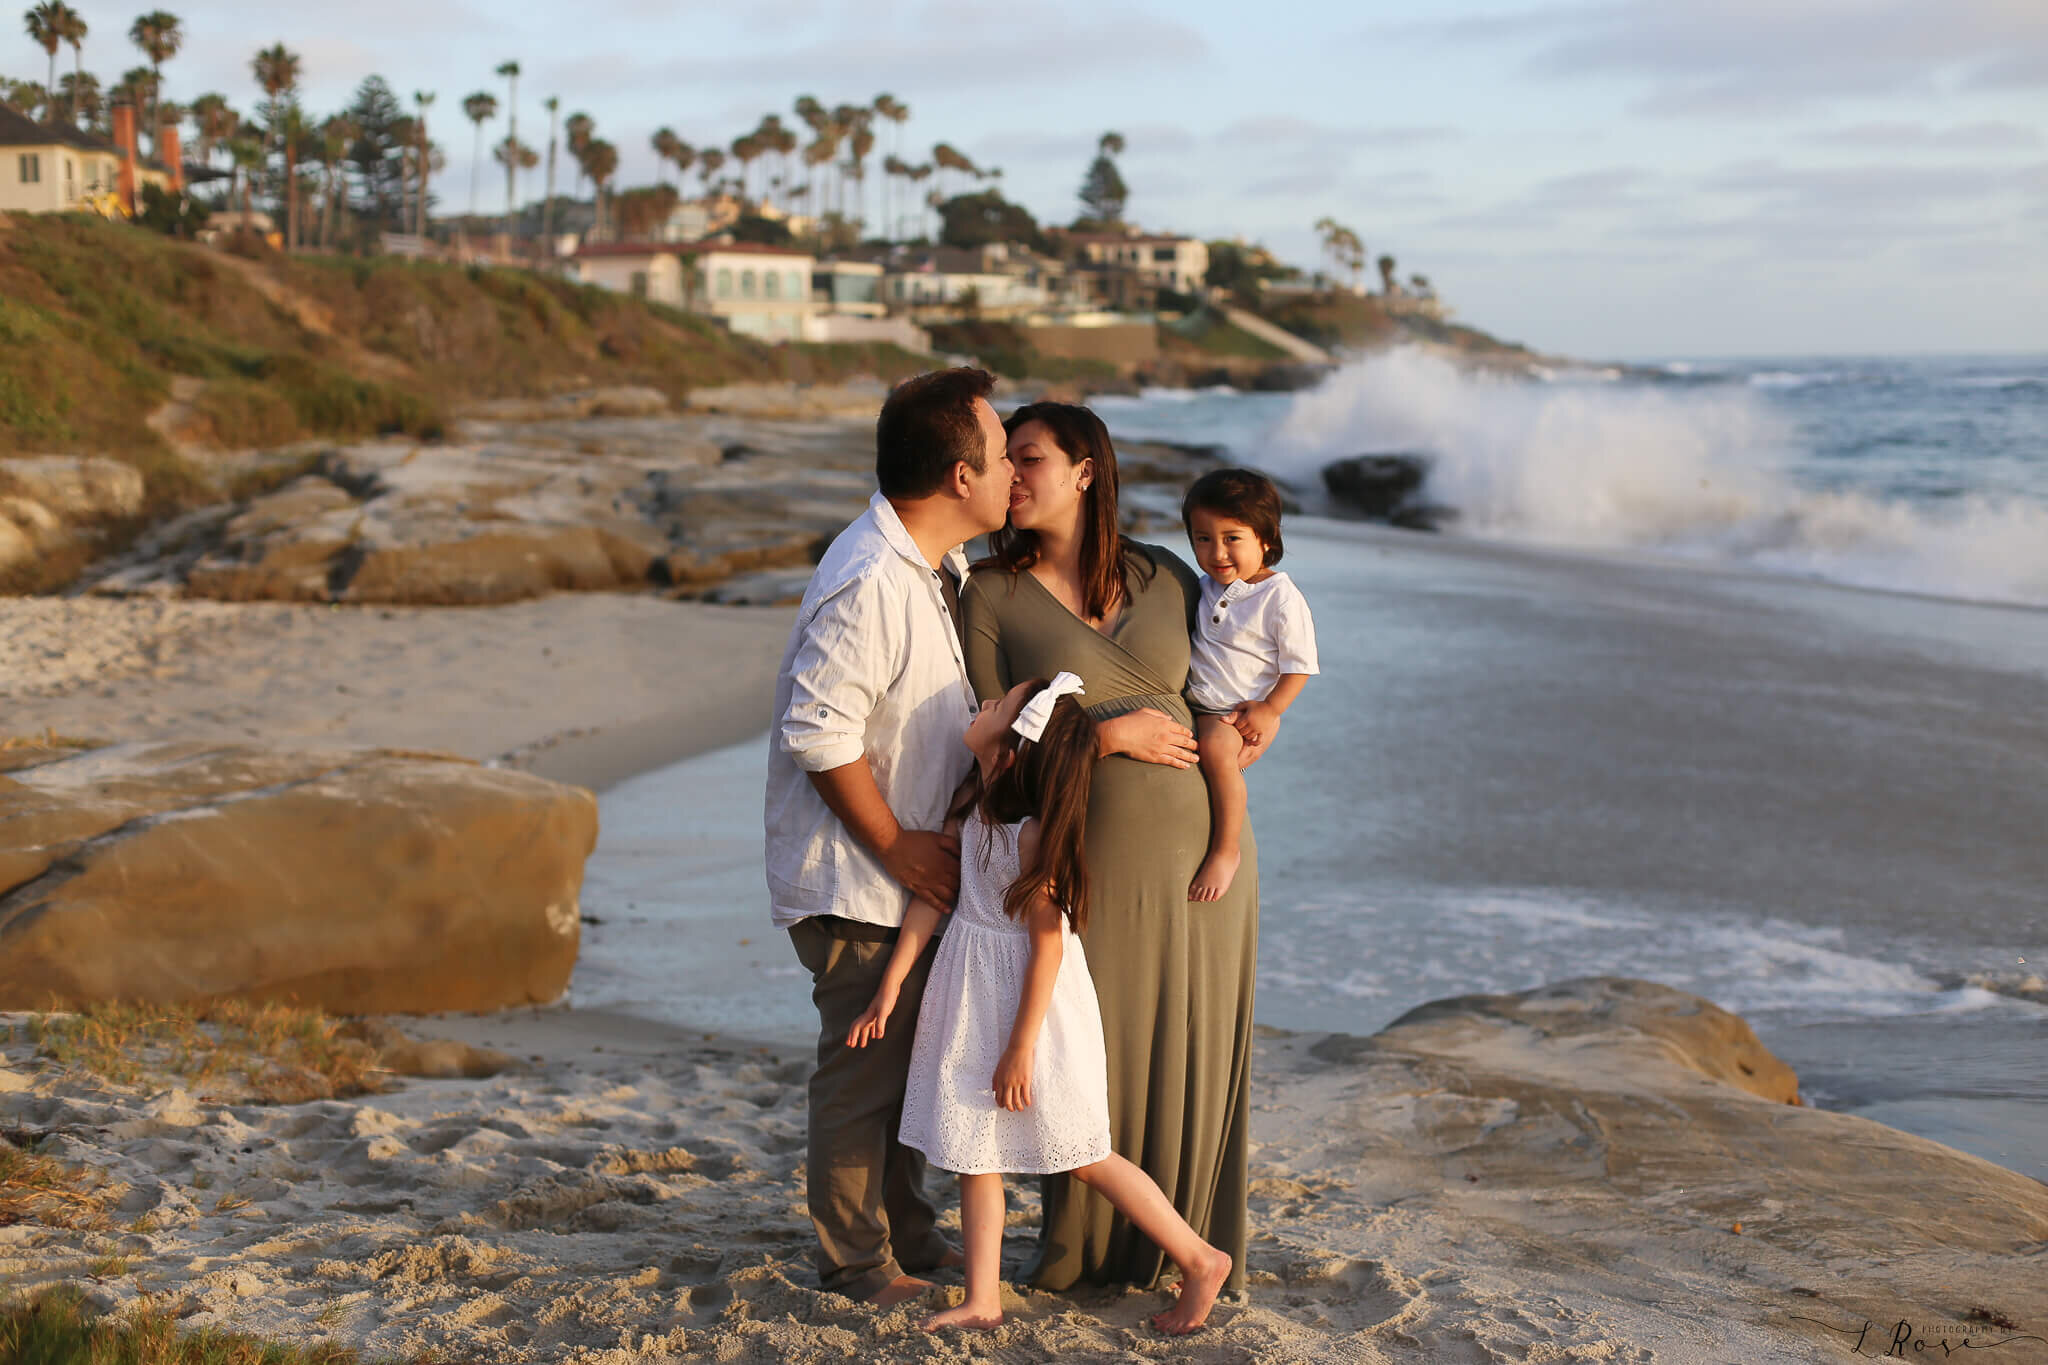  A photograph of a loving family as the expectant mom and dad romantically kiss as they hold onto their two children, standing at the edge of the ocean with a picturesque shoreline behind them from a family photo gallery 